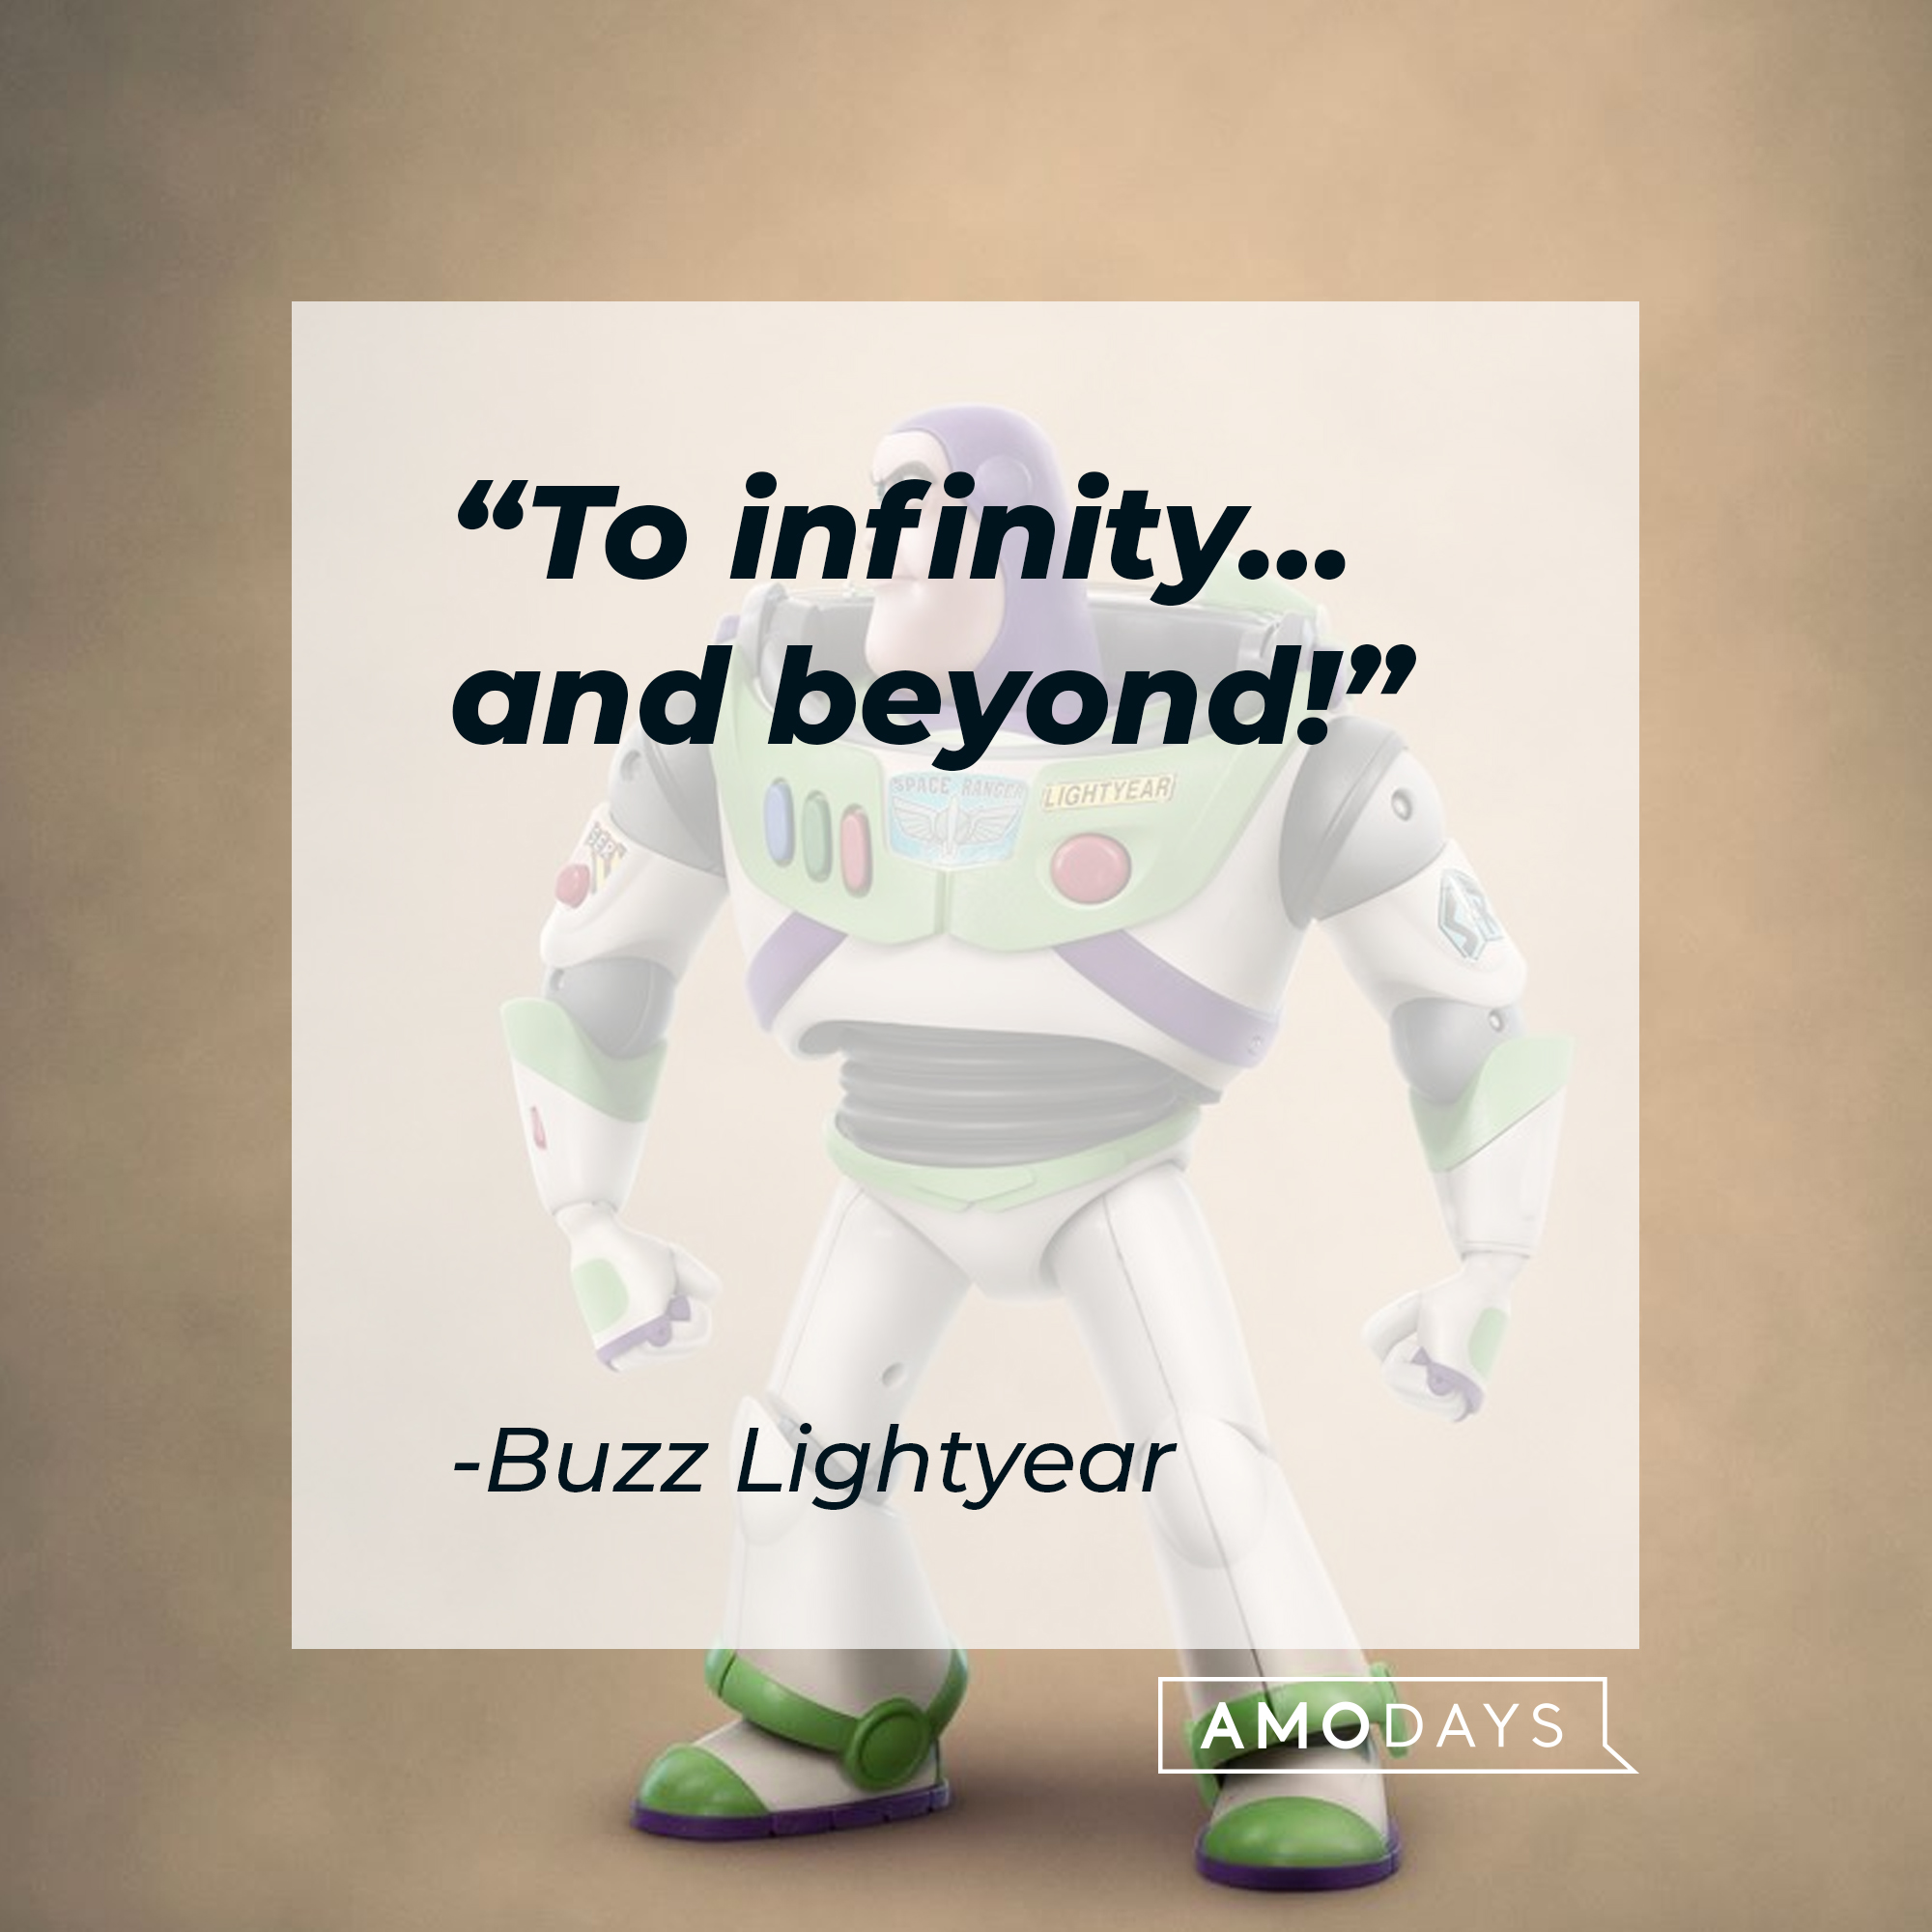 Buzz Lightyear's quote: "To infinity…and beyond!" | Source: Facebook/BuzzLightyear